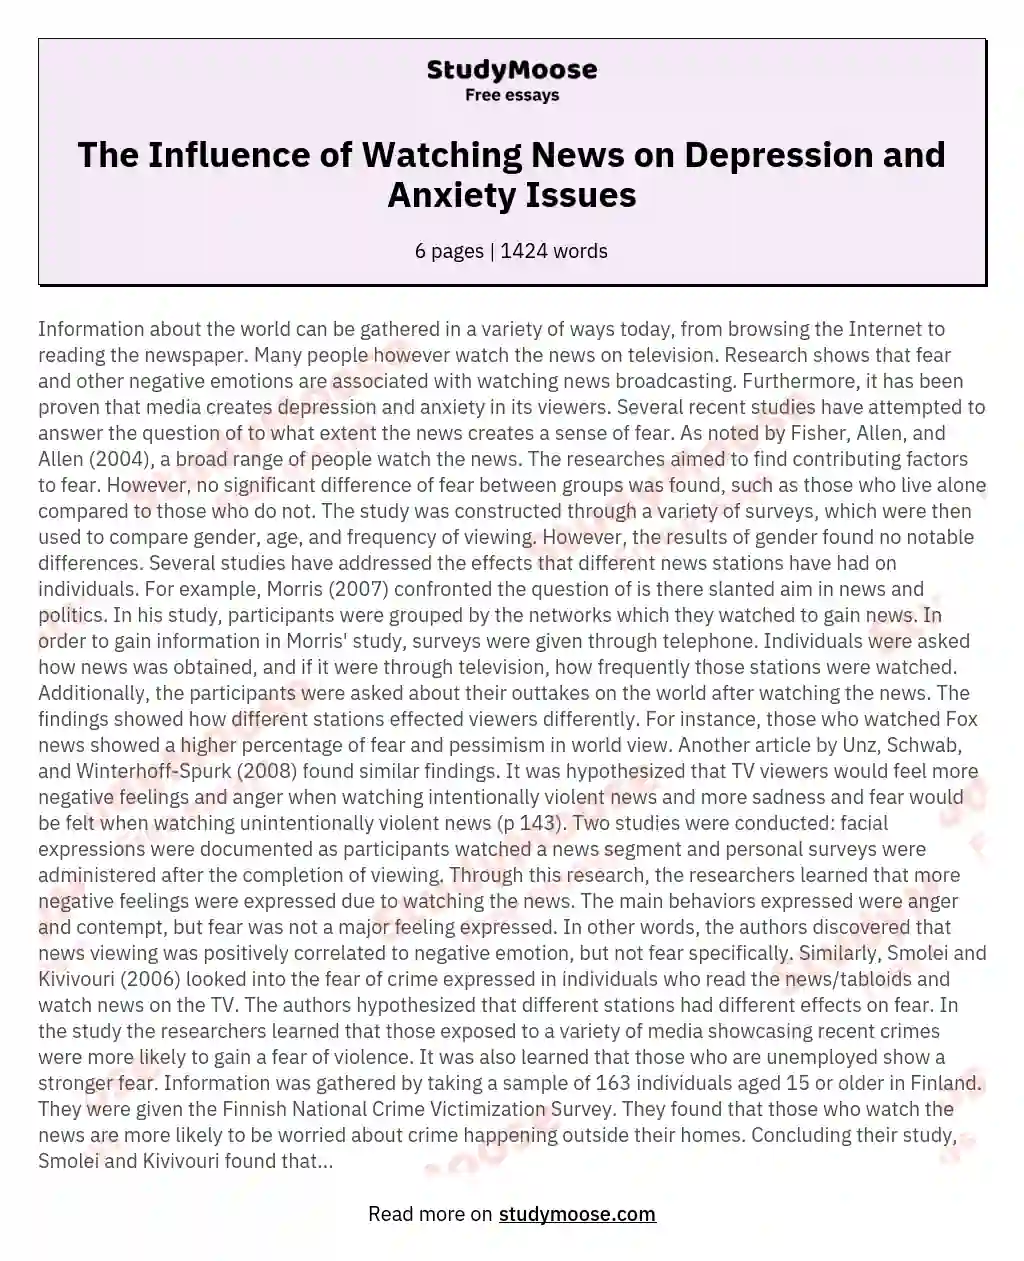 The Influence of Watching News on Depression and Anxiety Issues essay